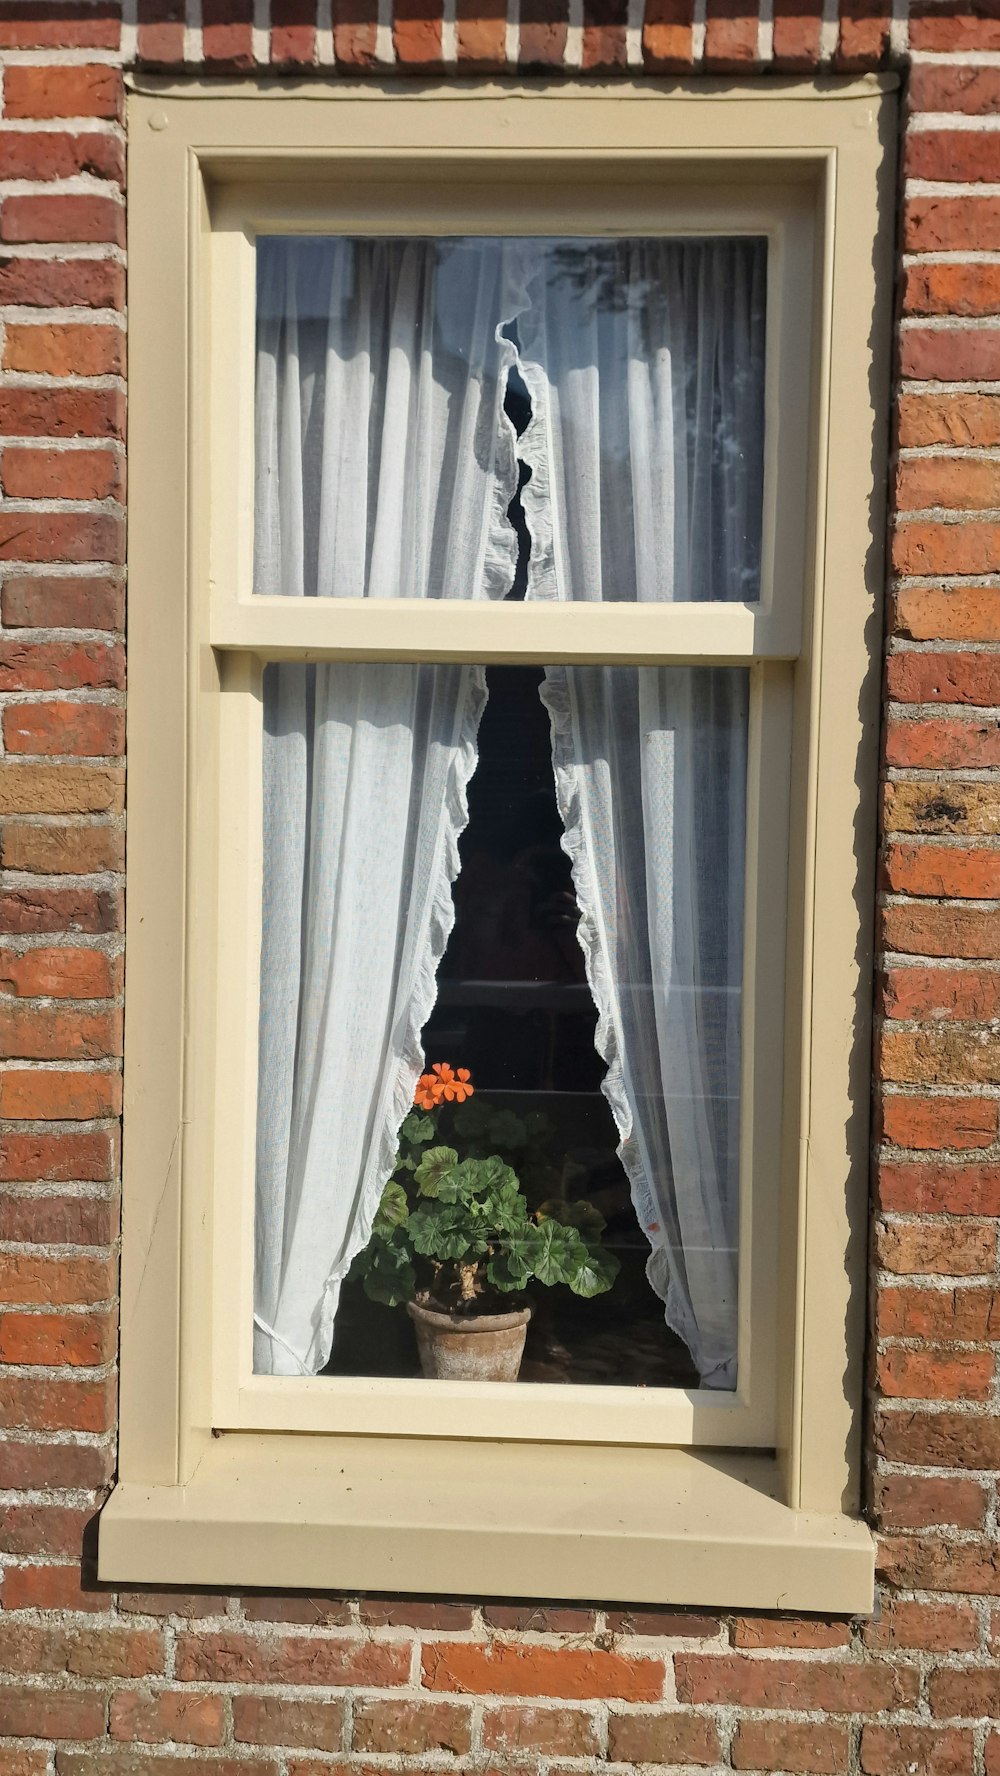 a window that has a potted plant in it